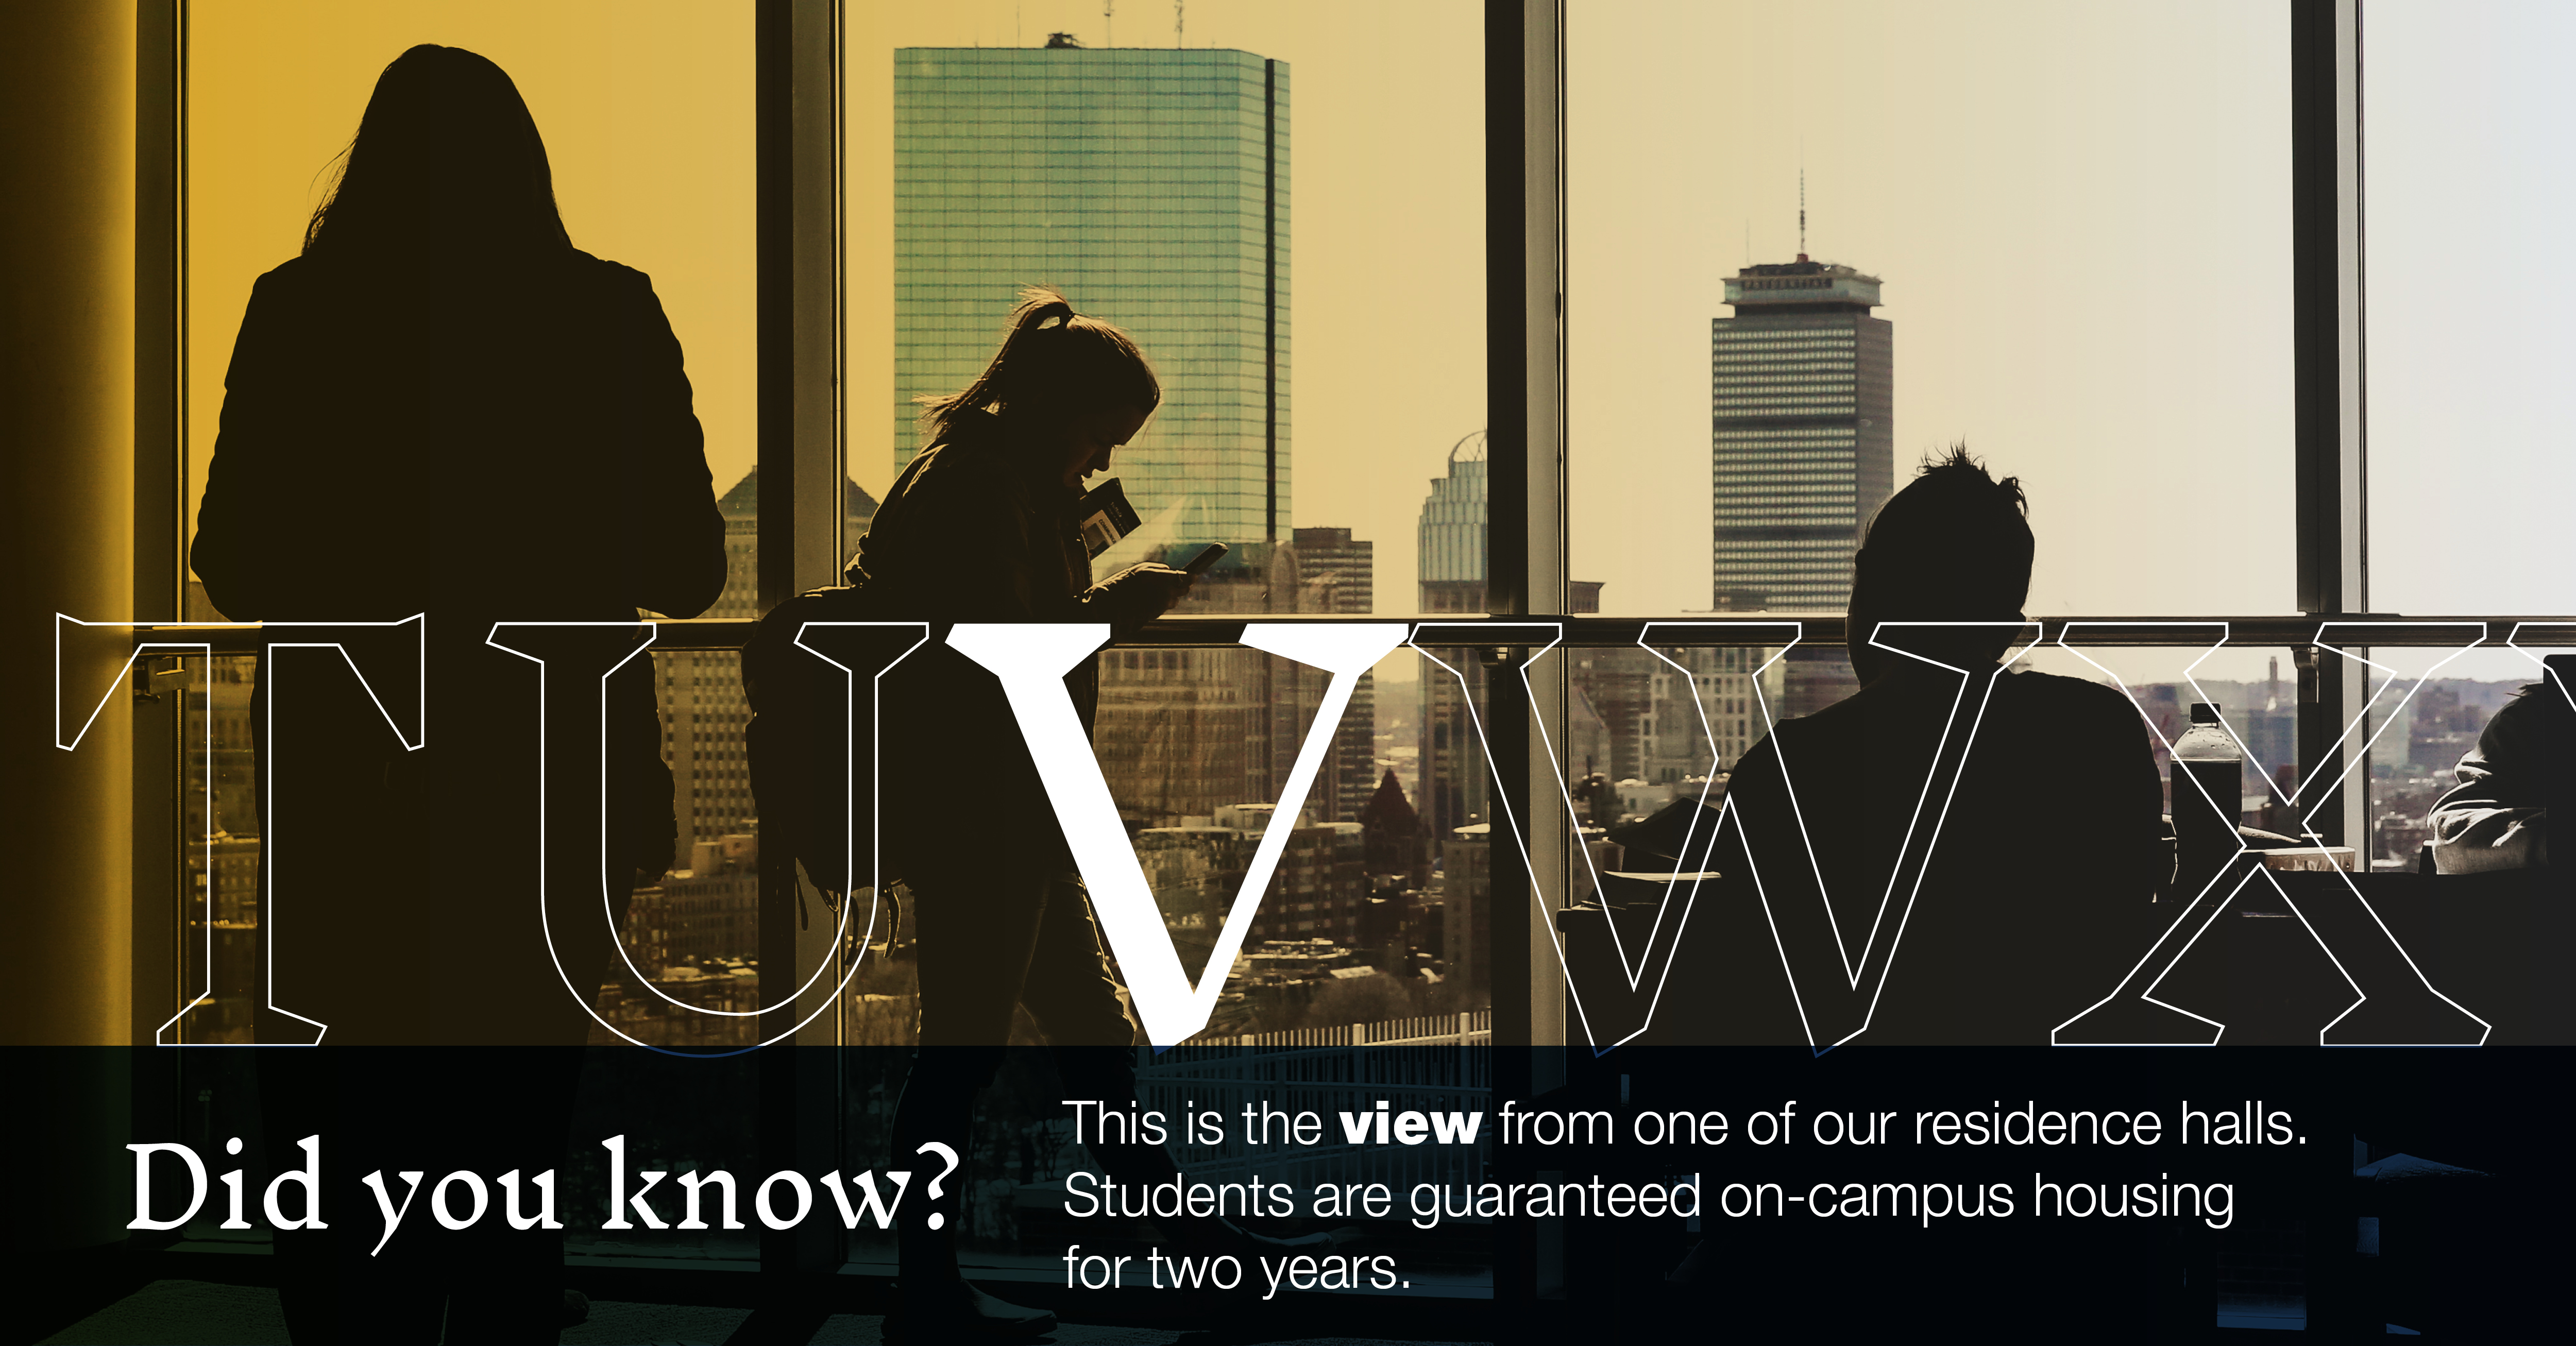 V: [image of skyline from Miller Hall] Did you know this is the view from one of our residence halls?